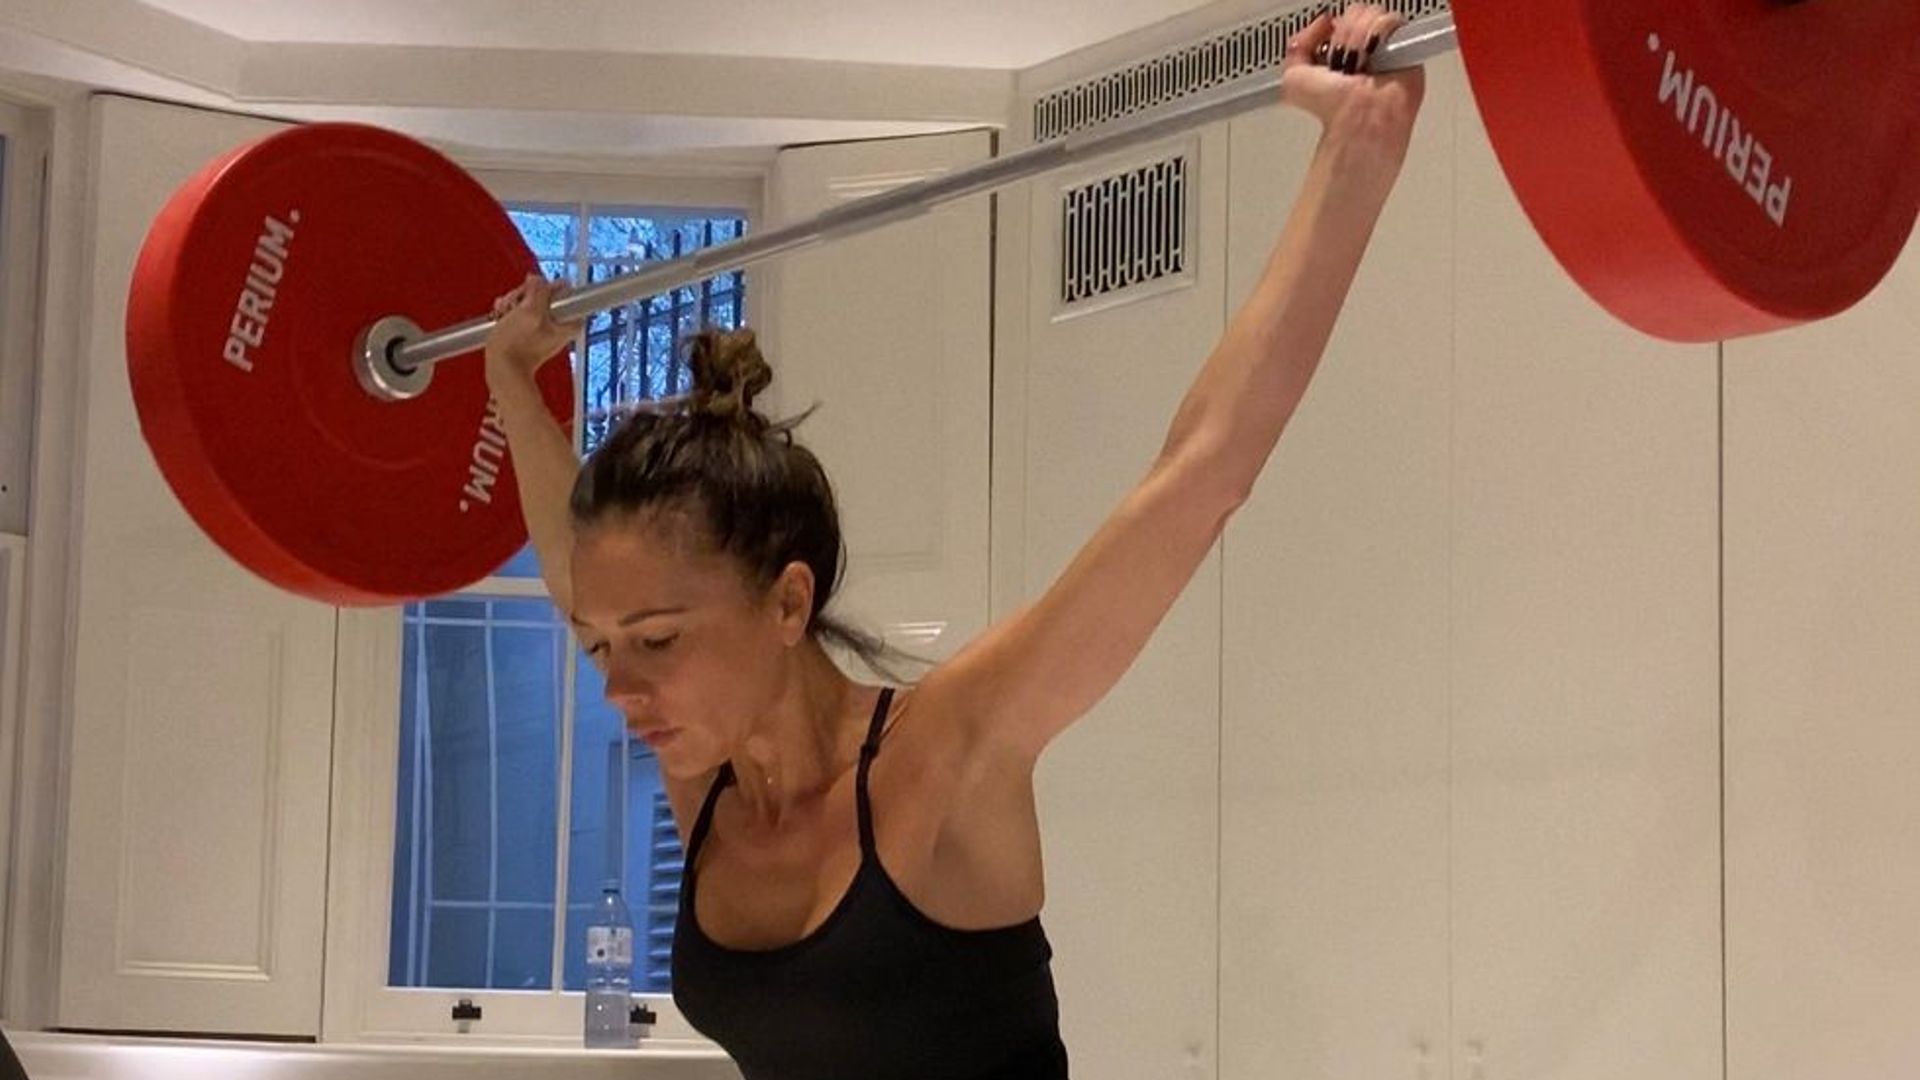 Brie Larson's Captain Marvel workout: What happened when I tried